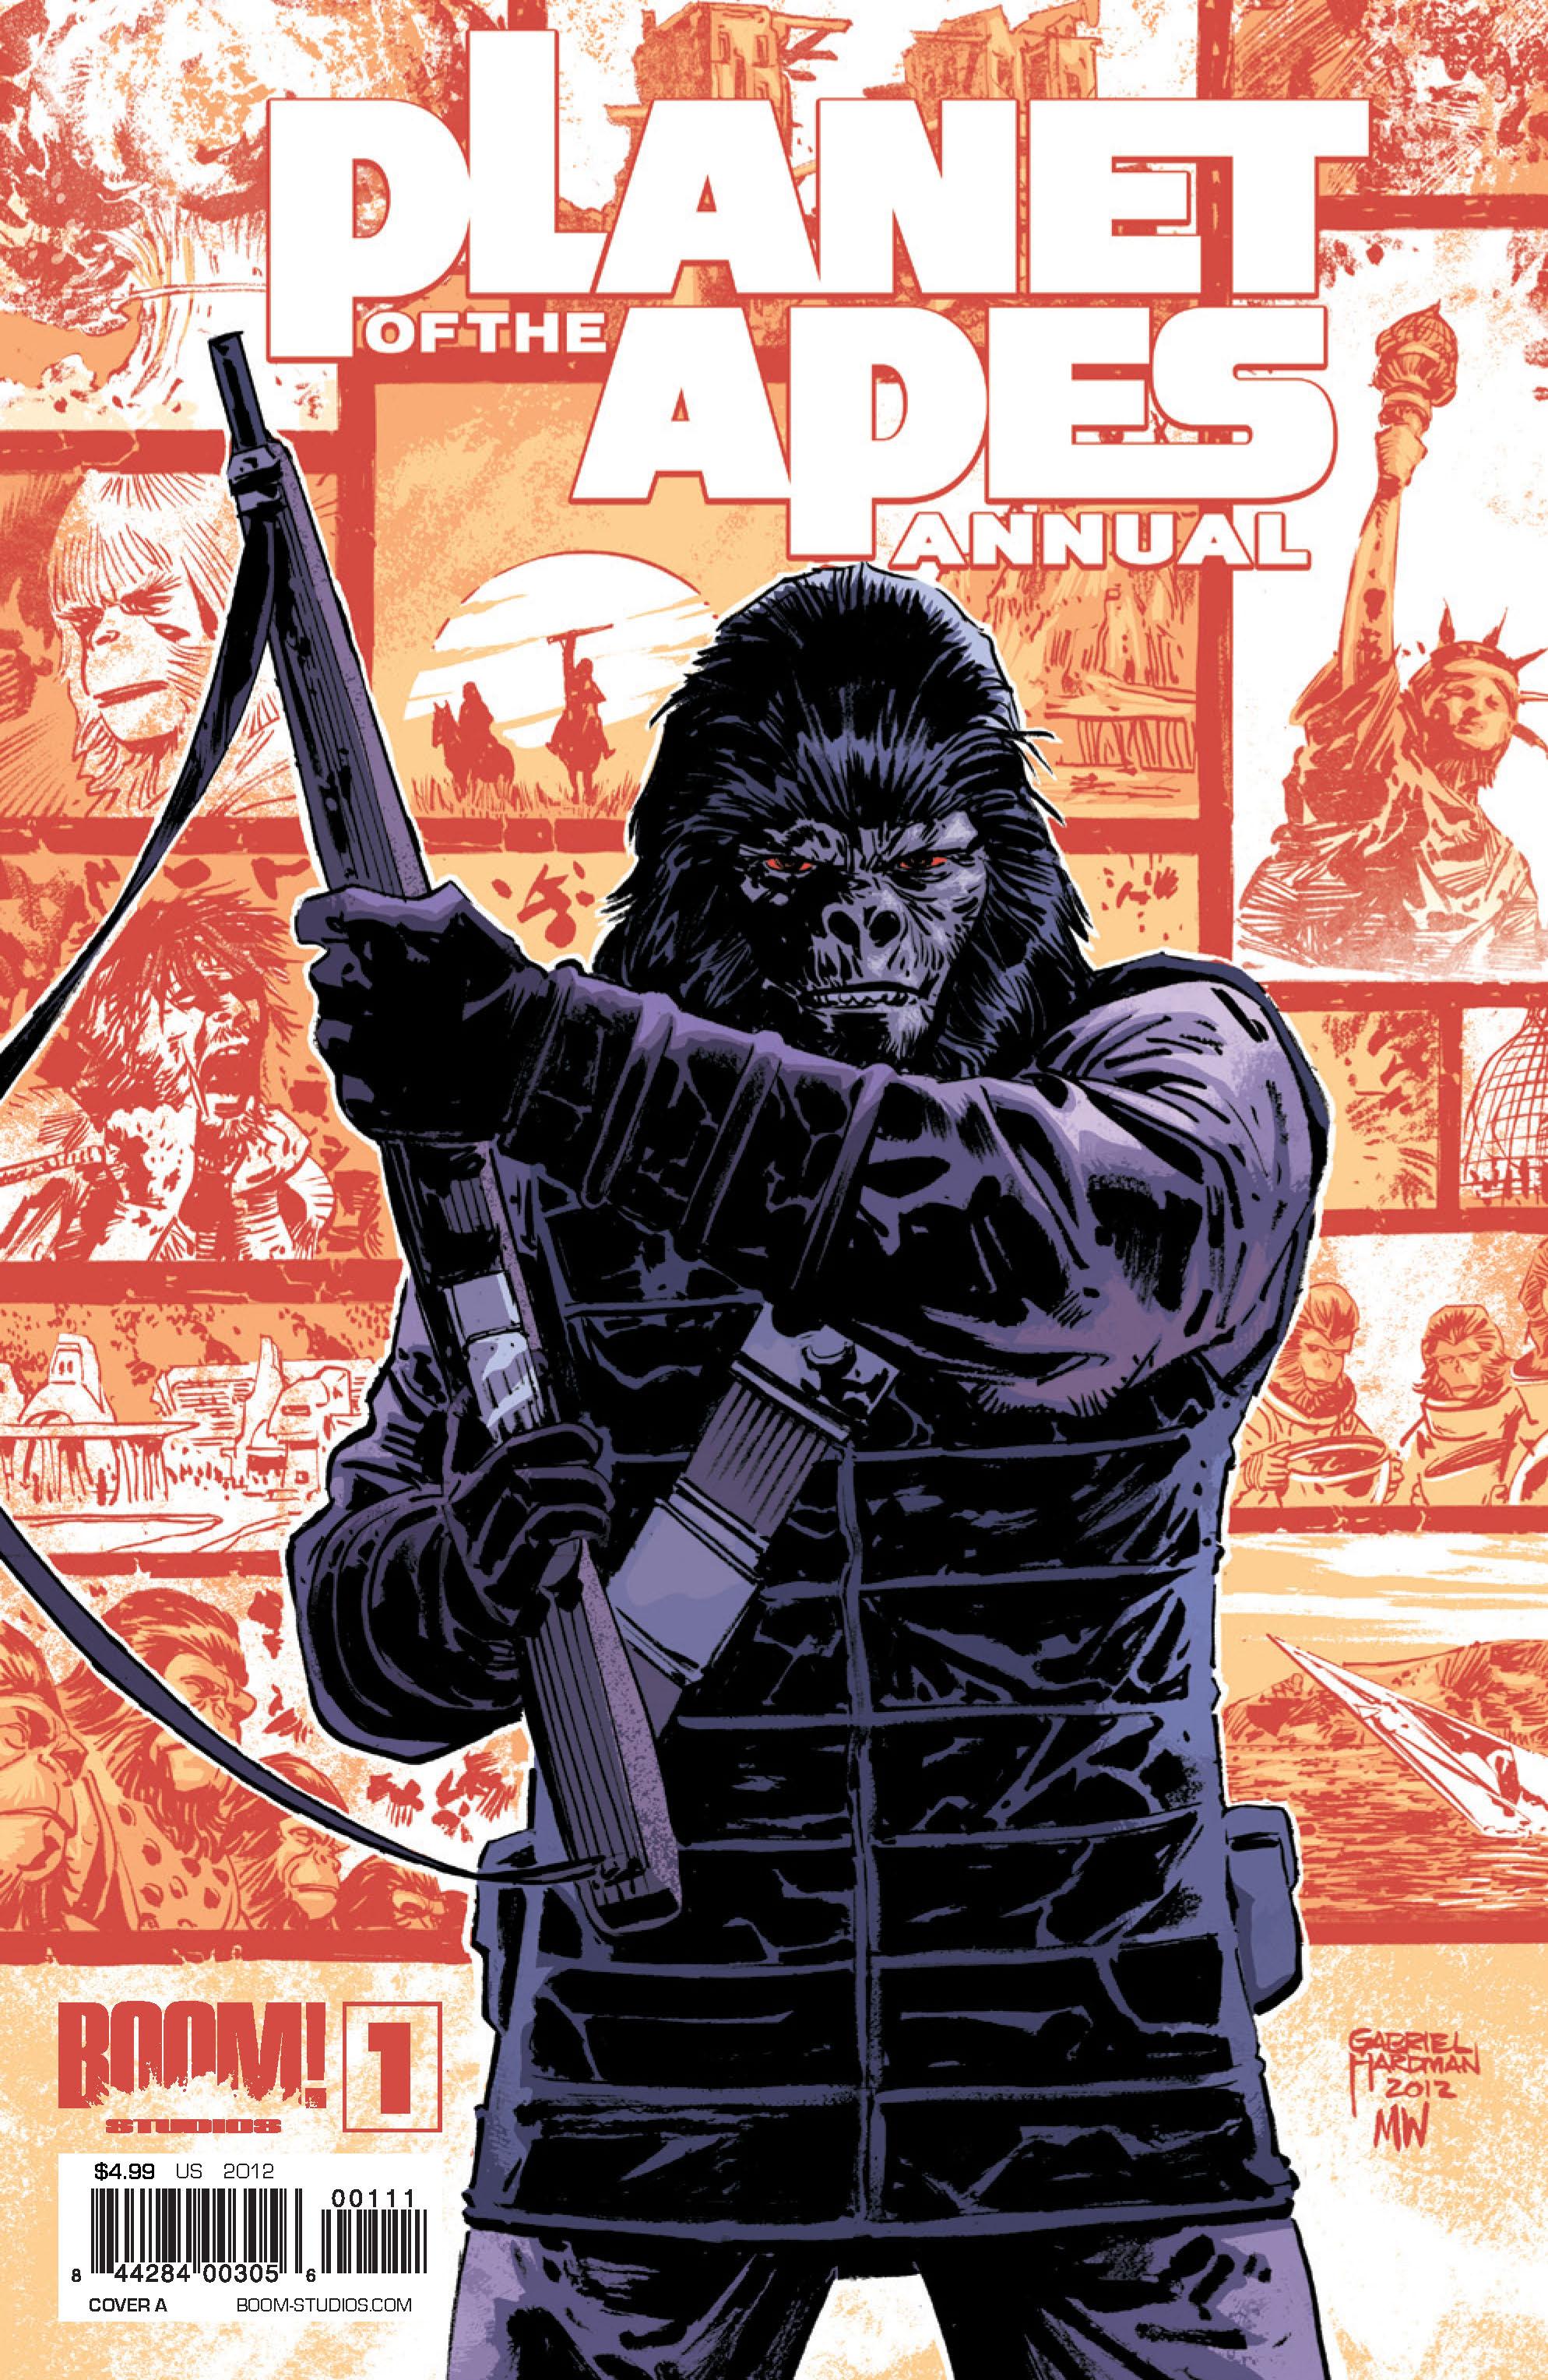 PLANET OF THE APES ANNUAL #1